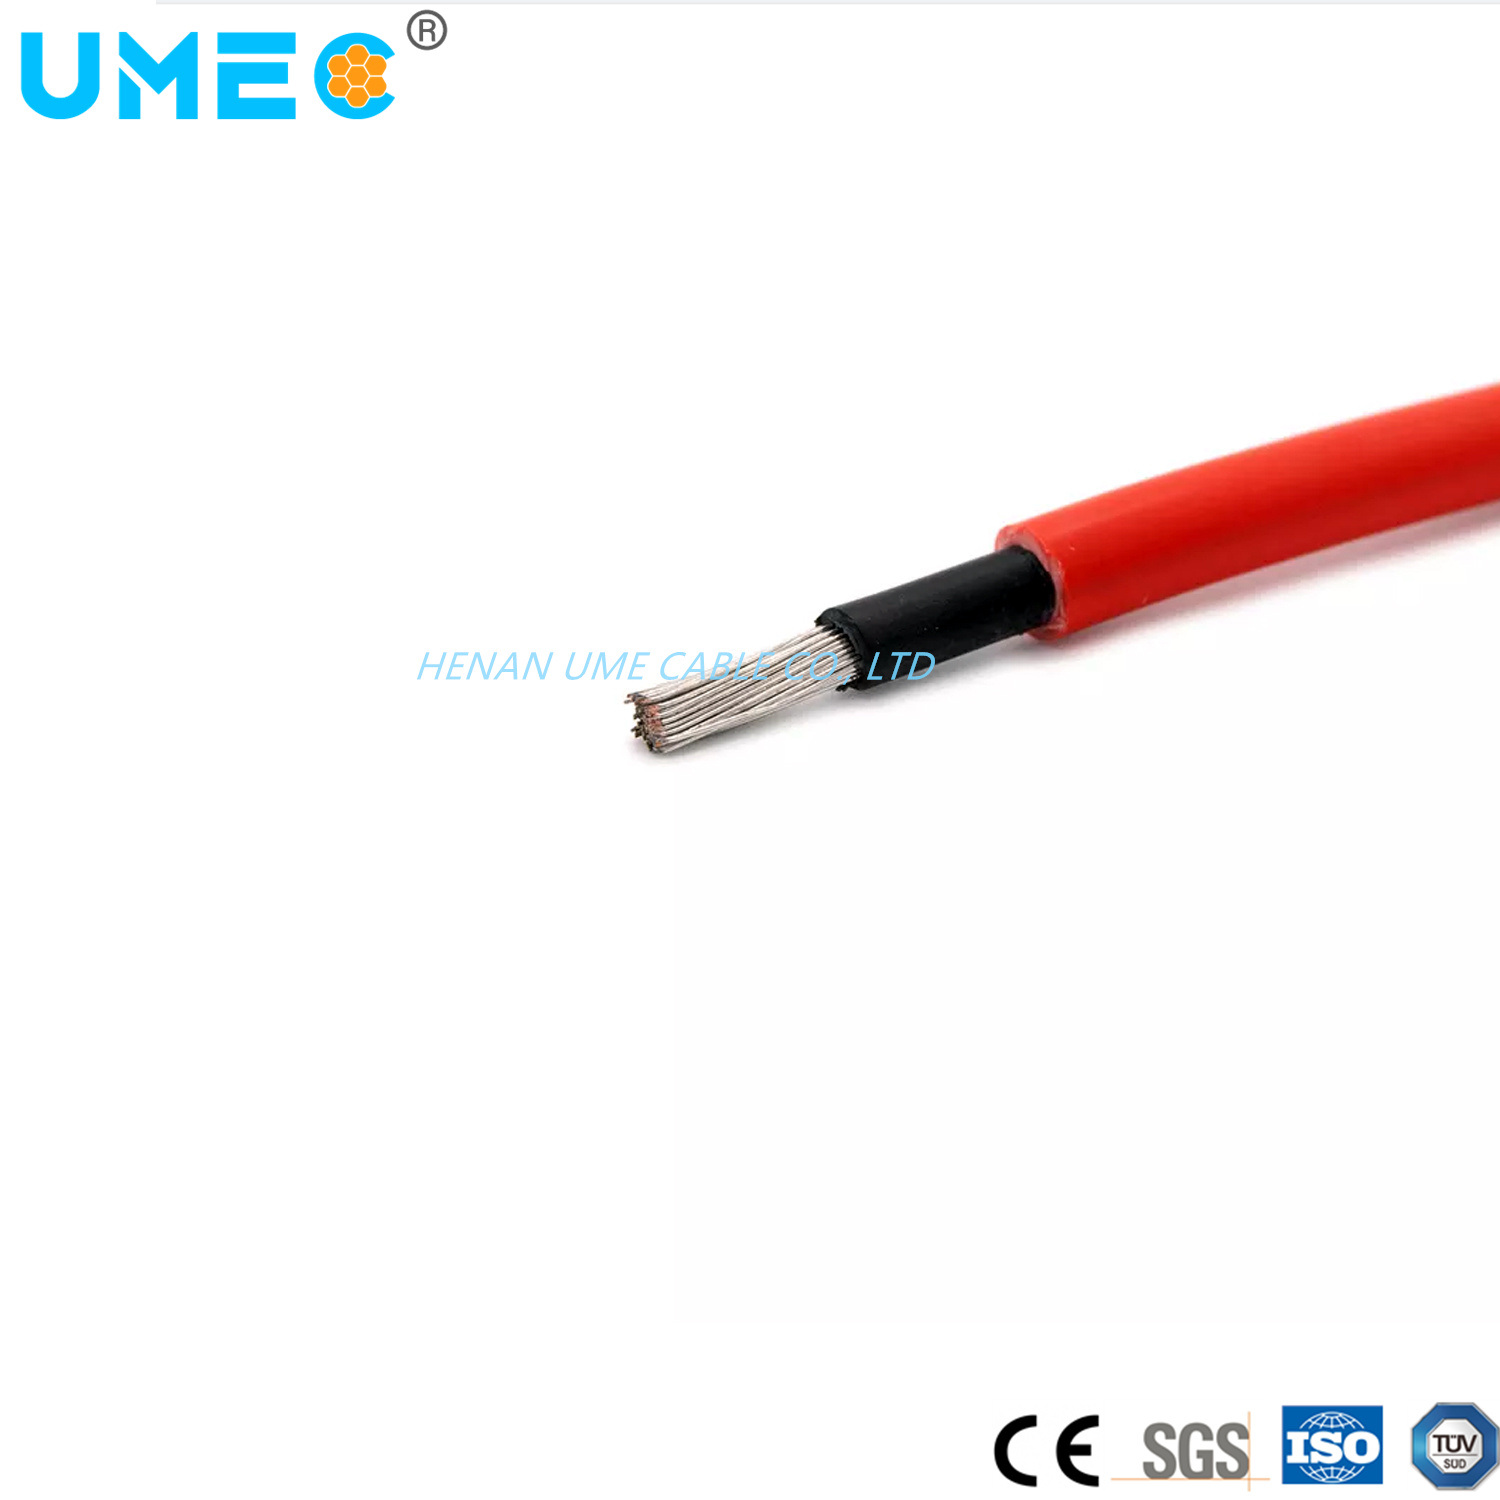 Xlpo Insulation PV Solar Cable 1000V 1500V 2000V 4mm2 6mm2 10mm2 DC PV Cable Solar Cable PV Wire PV1-F